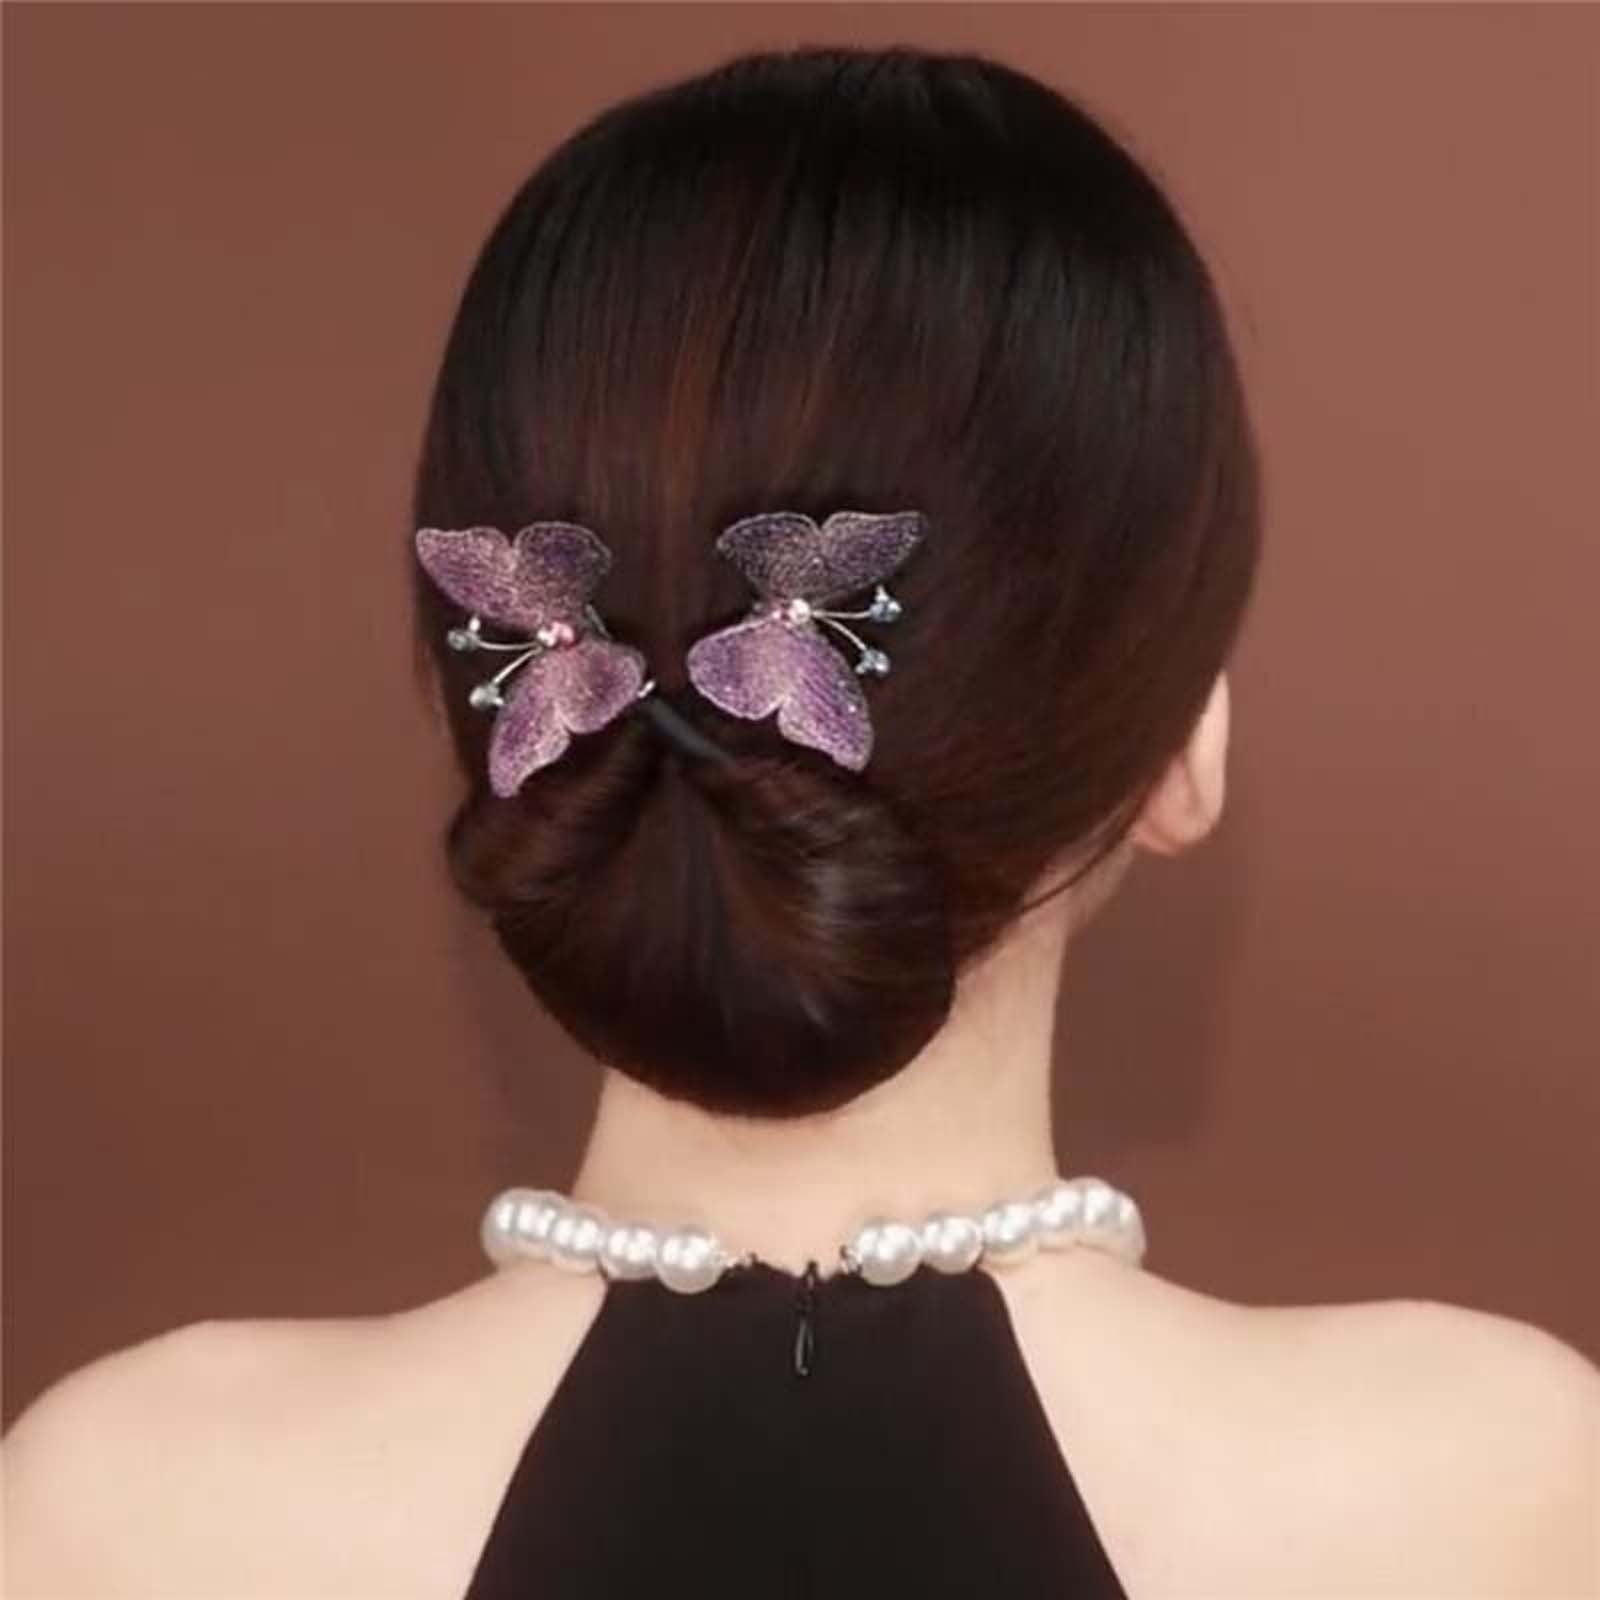 Butterfly Clips Are Back From the 90s and Begging to Be Fall 2020's  Favorite Hair Accessory